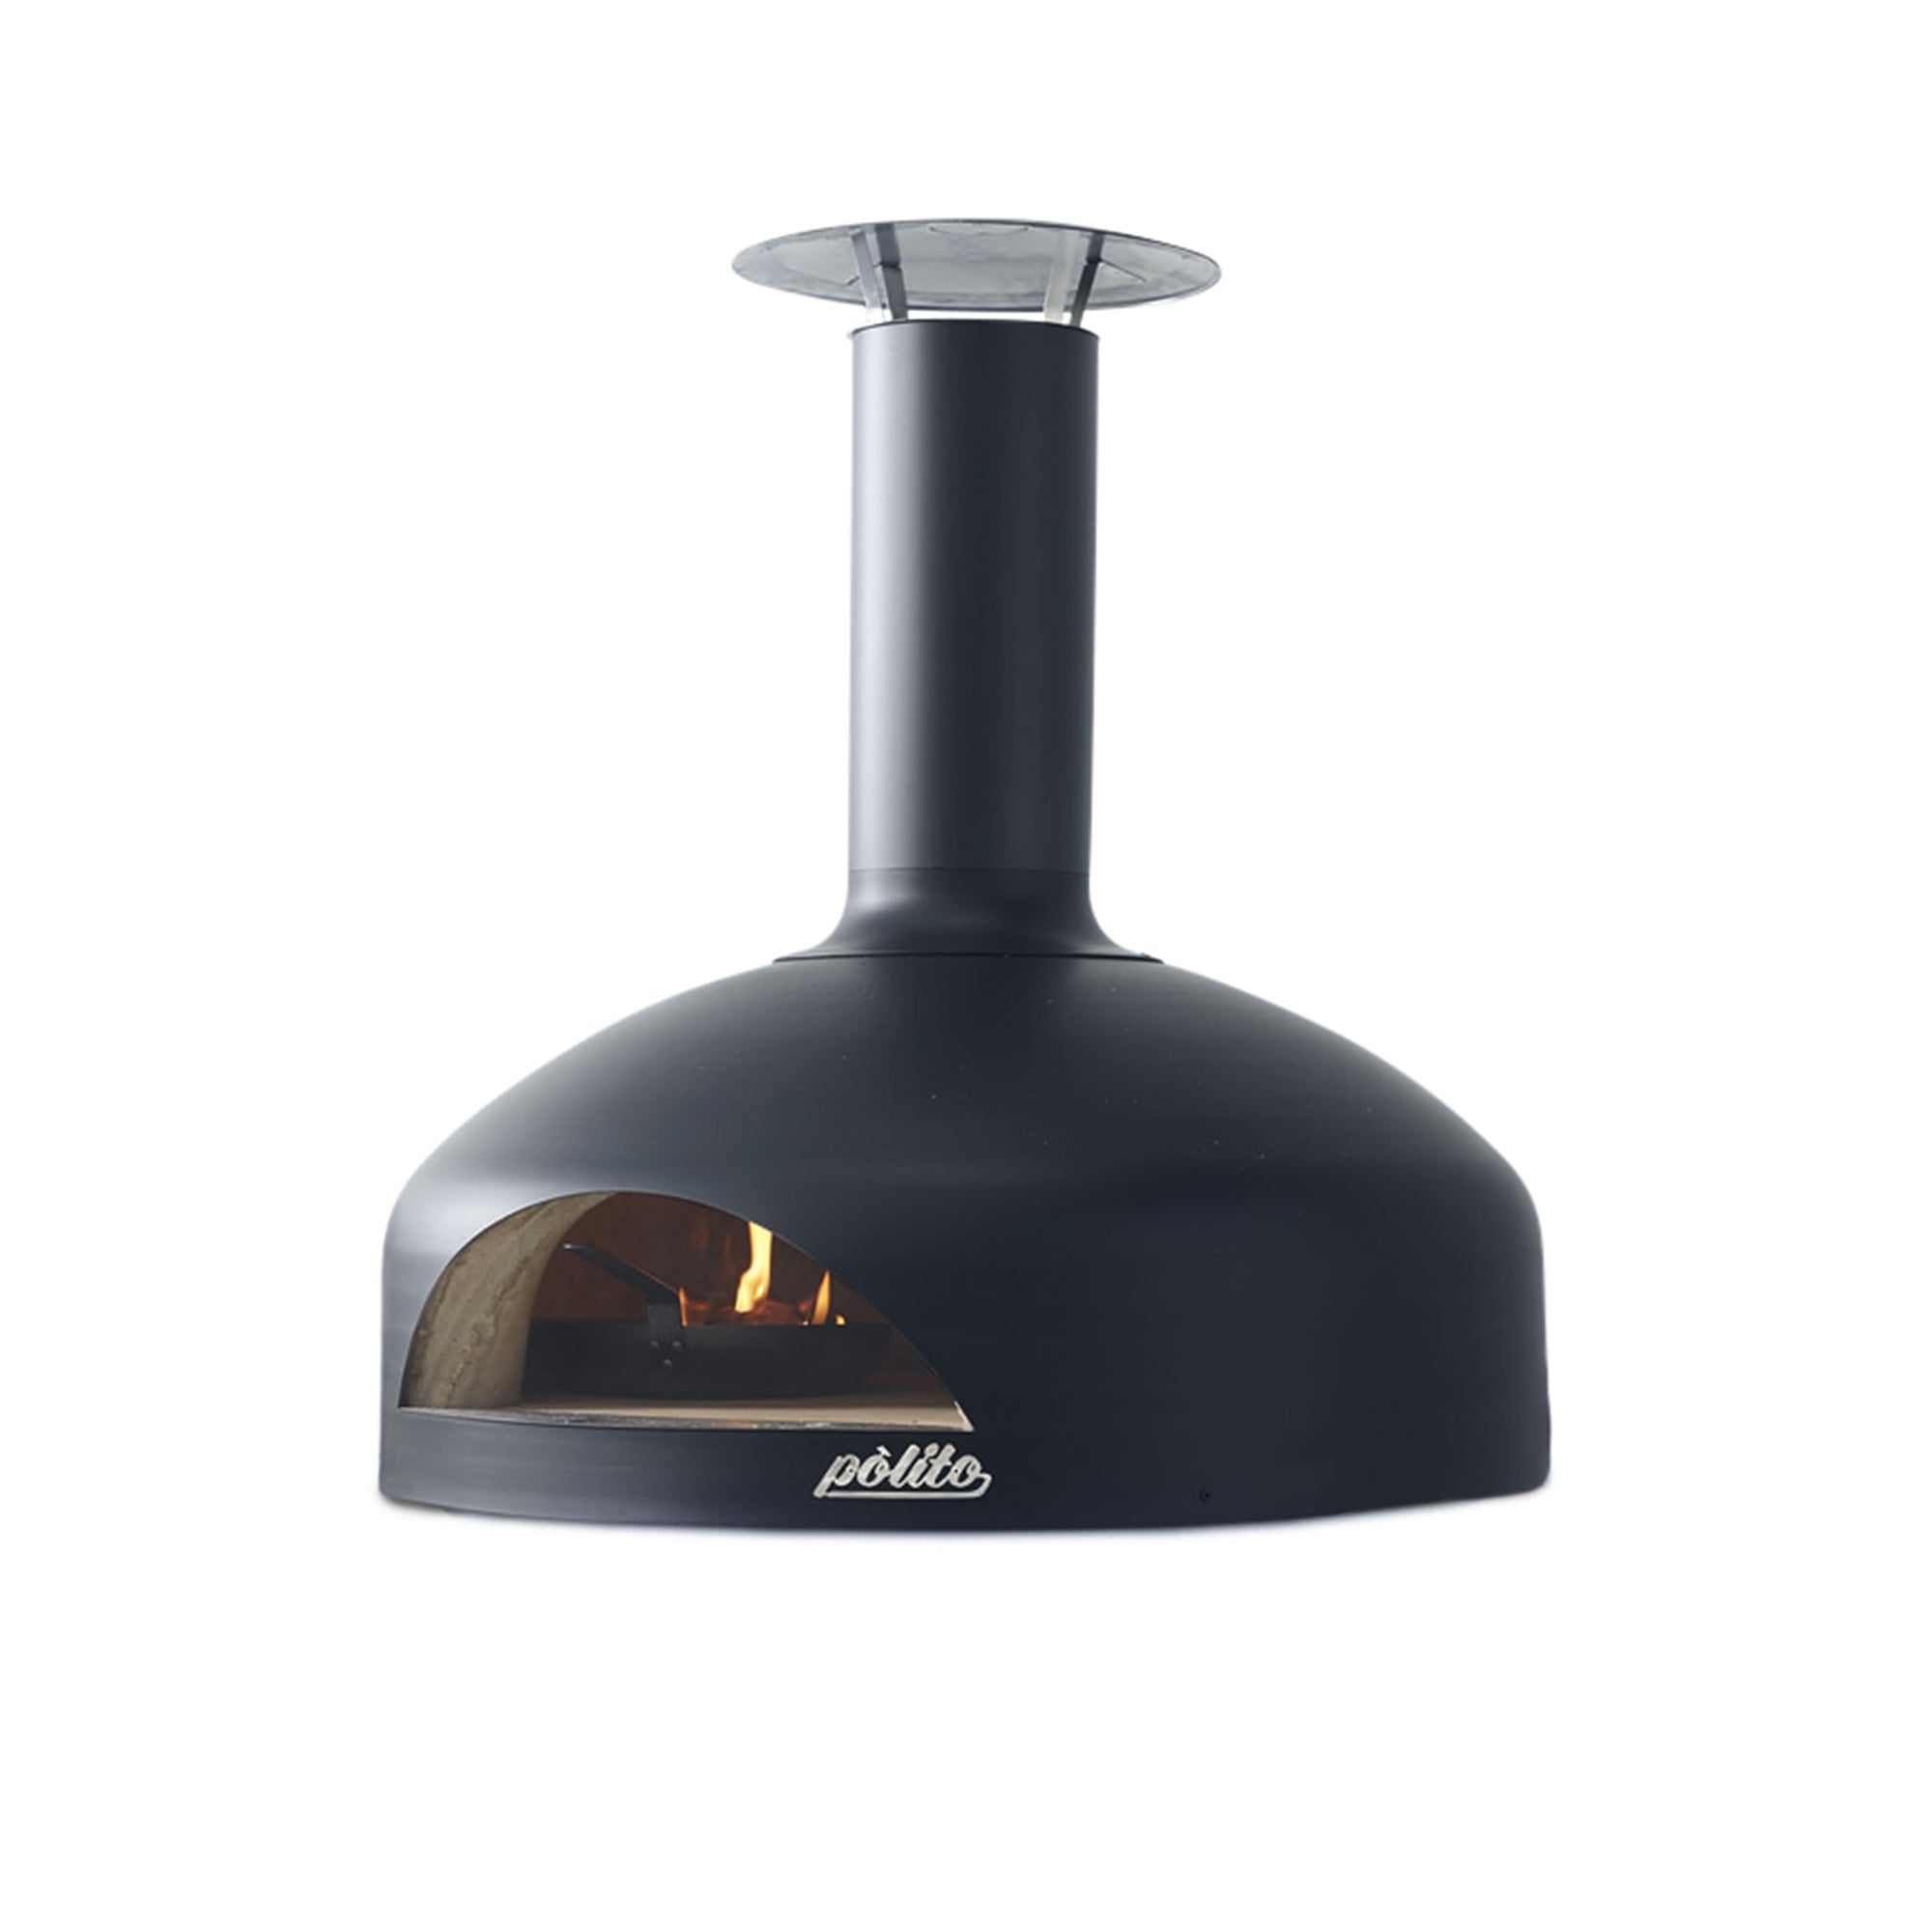 Polito Giotto Wood Fired Oven